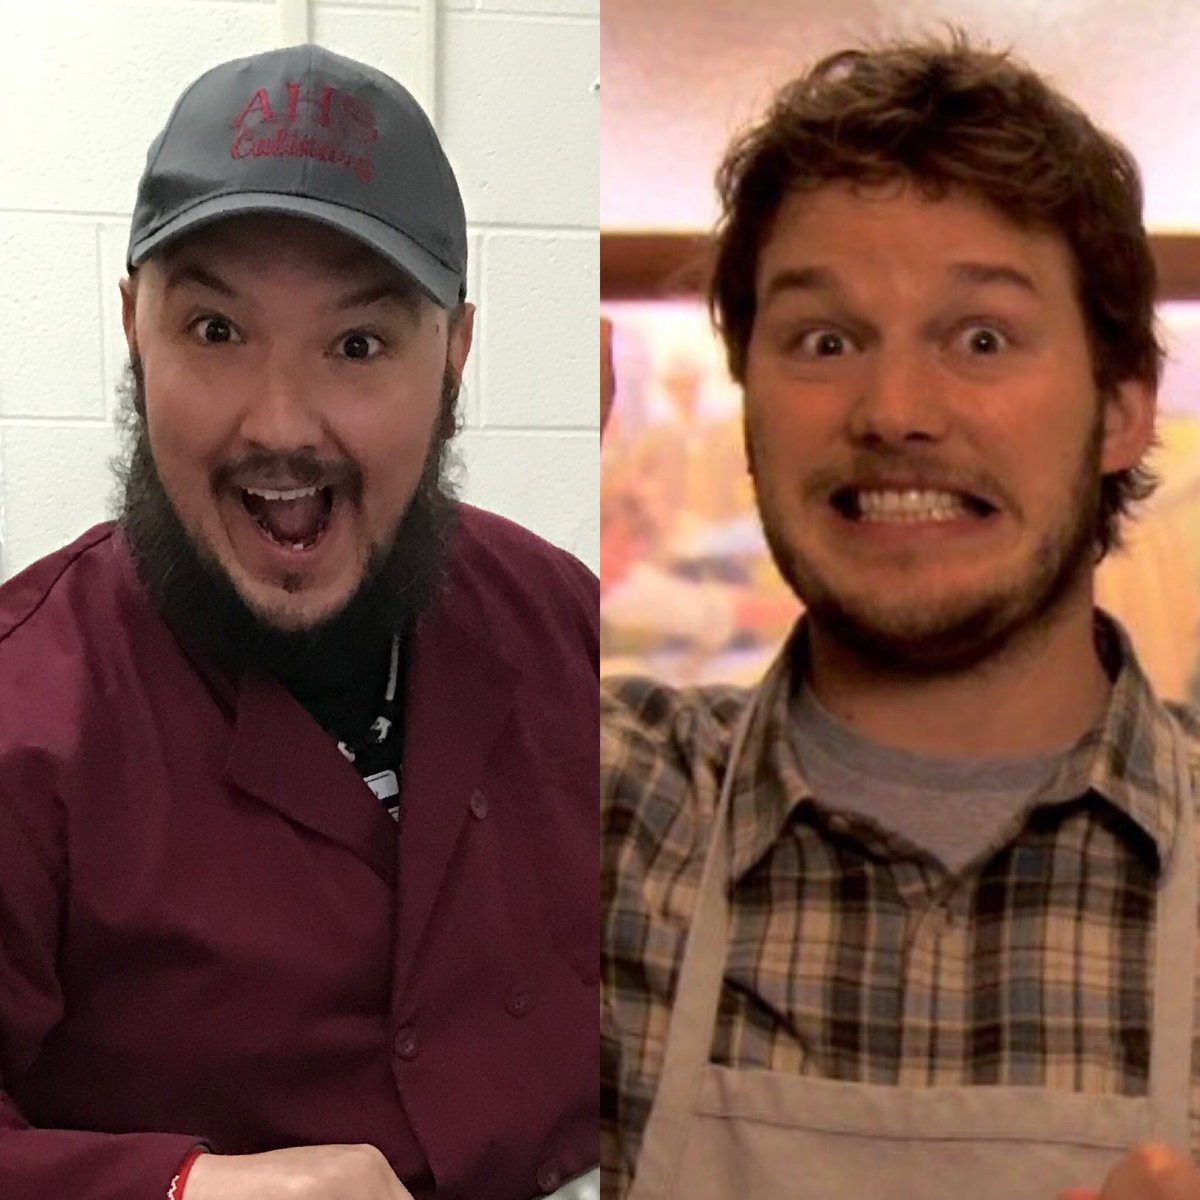 When your first block kiddos are all sitting there like 🤭 staring at @TheAHSMrLandry because they think he looks like @prattprattpratt you know it’s #WackyWednesday #AHSCHAT #thisis9thgrade